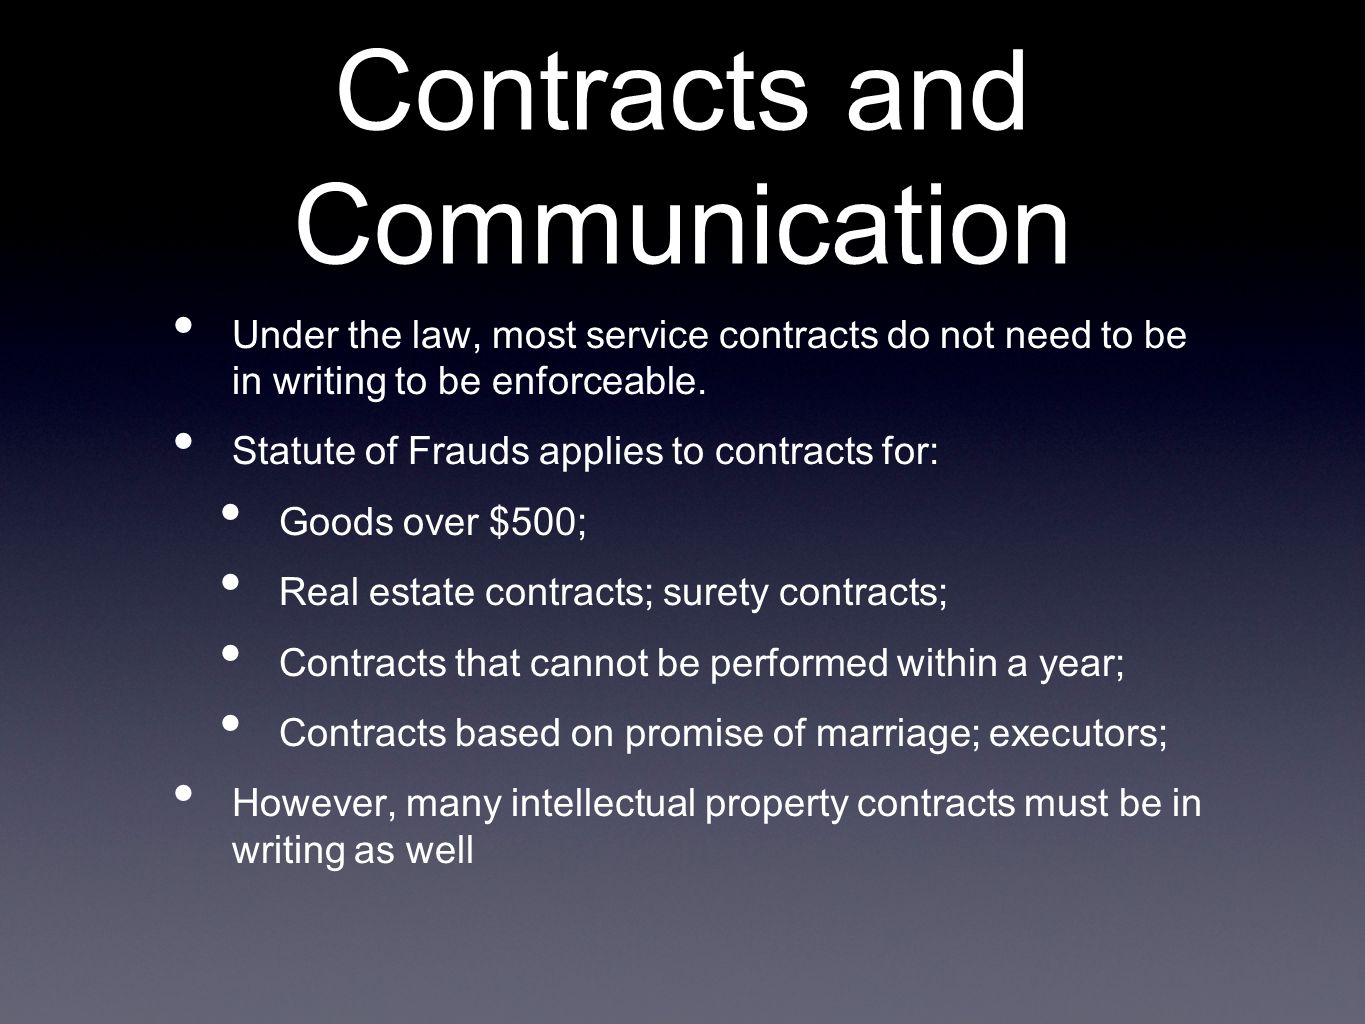 Contracts and Communication Under the law, most service contracts do not need to be in writing to be enforceable.